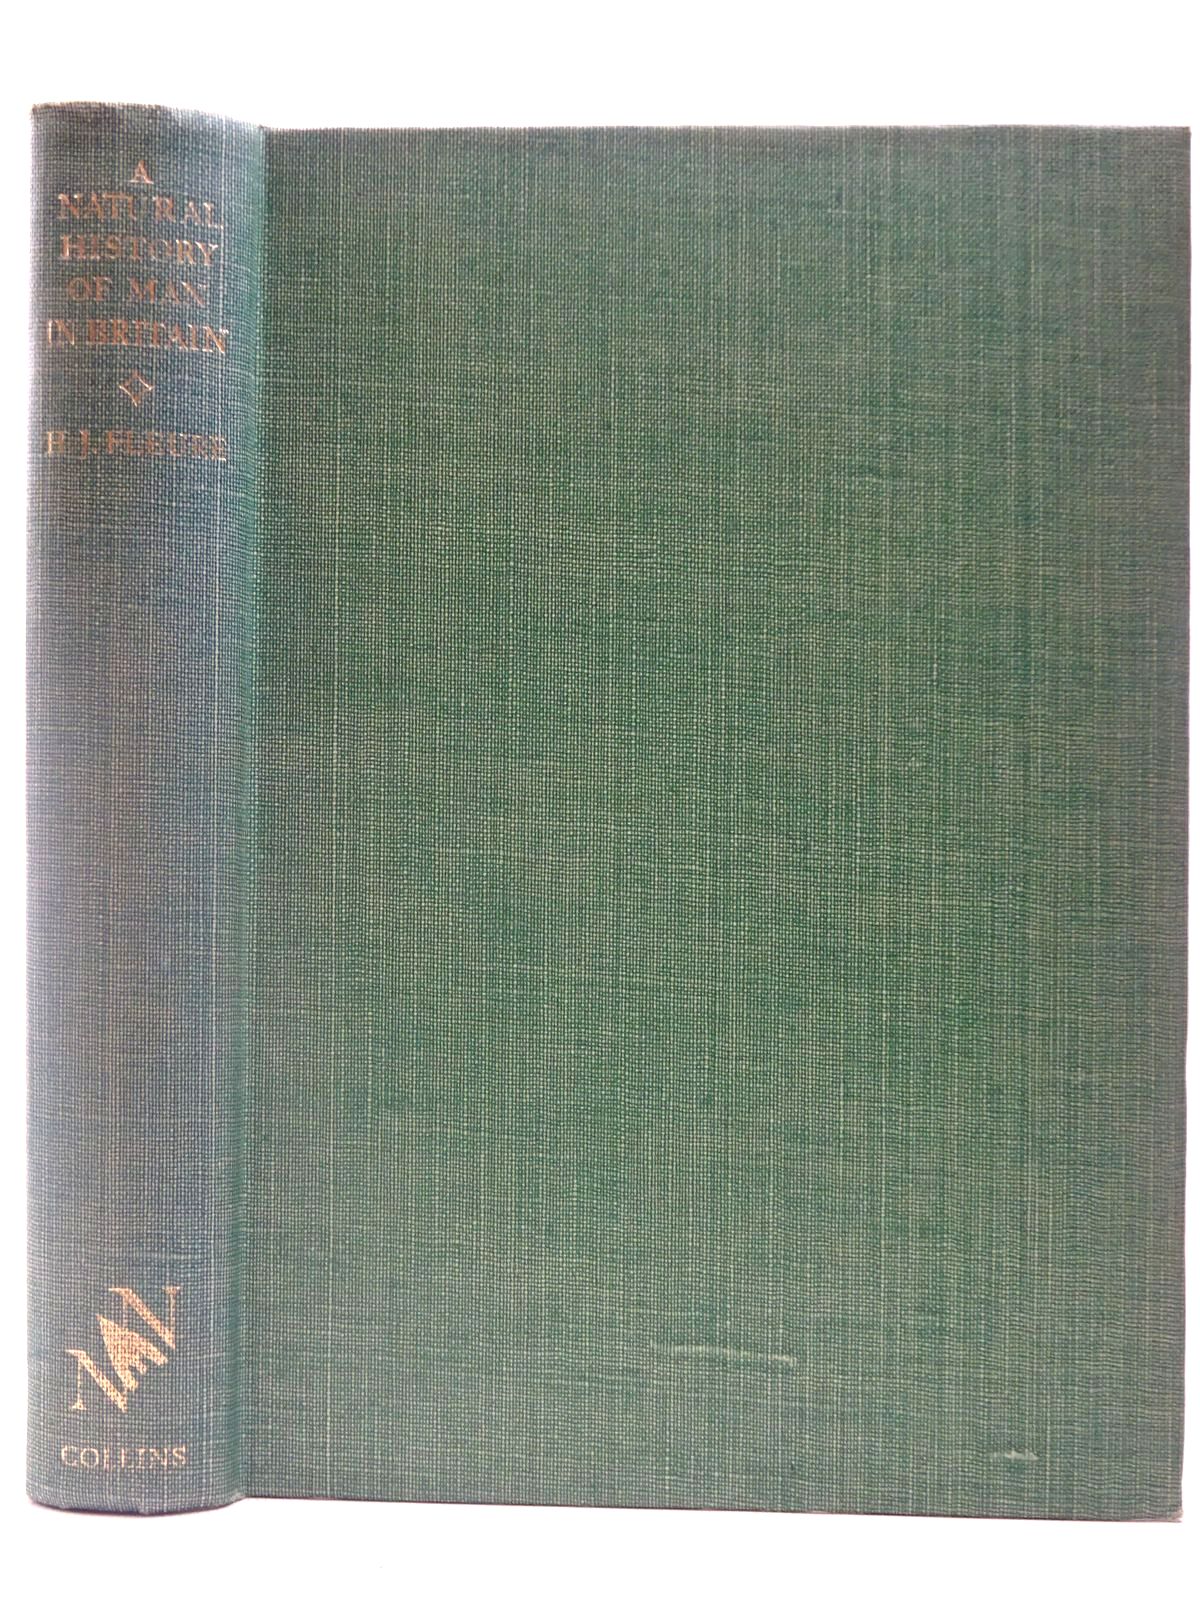 Photo of A NATURAL HISTORY OF MAN IN BRITAIN (NN 18) written by Fleure, H.J. illustrated by Birch, Alison published by Collins (STOCK CODE: 2126919)  for sale by Stella & Rose's Books